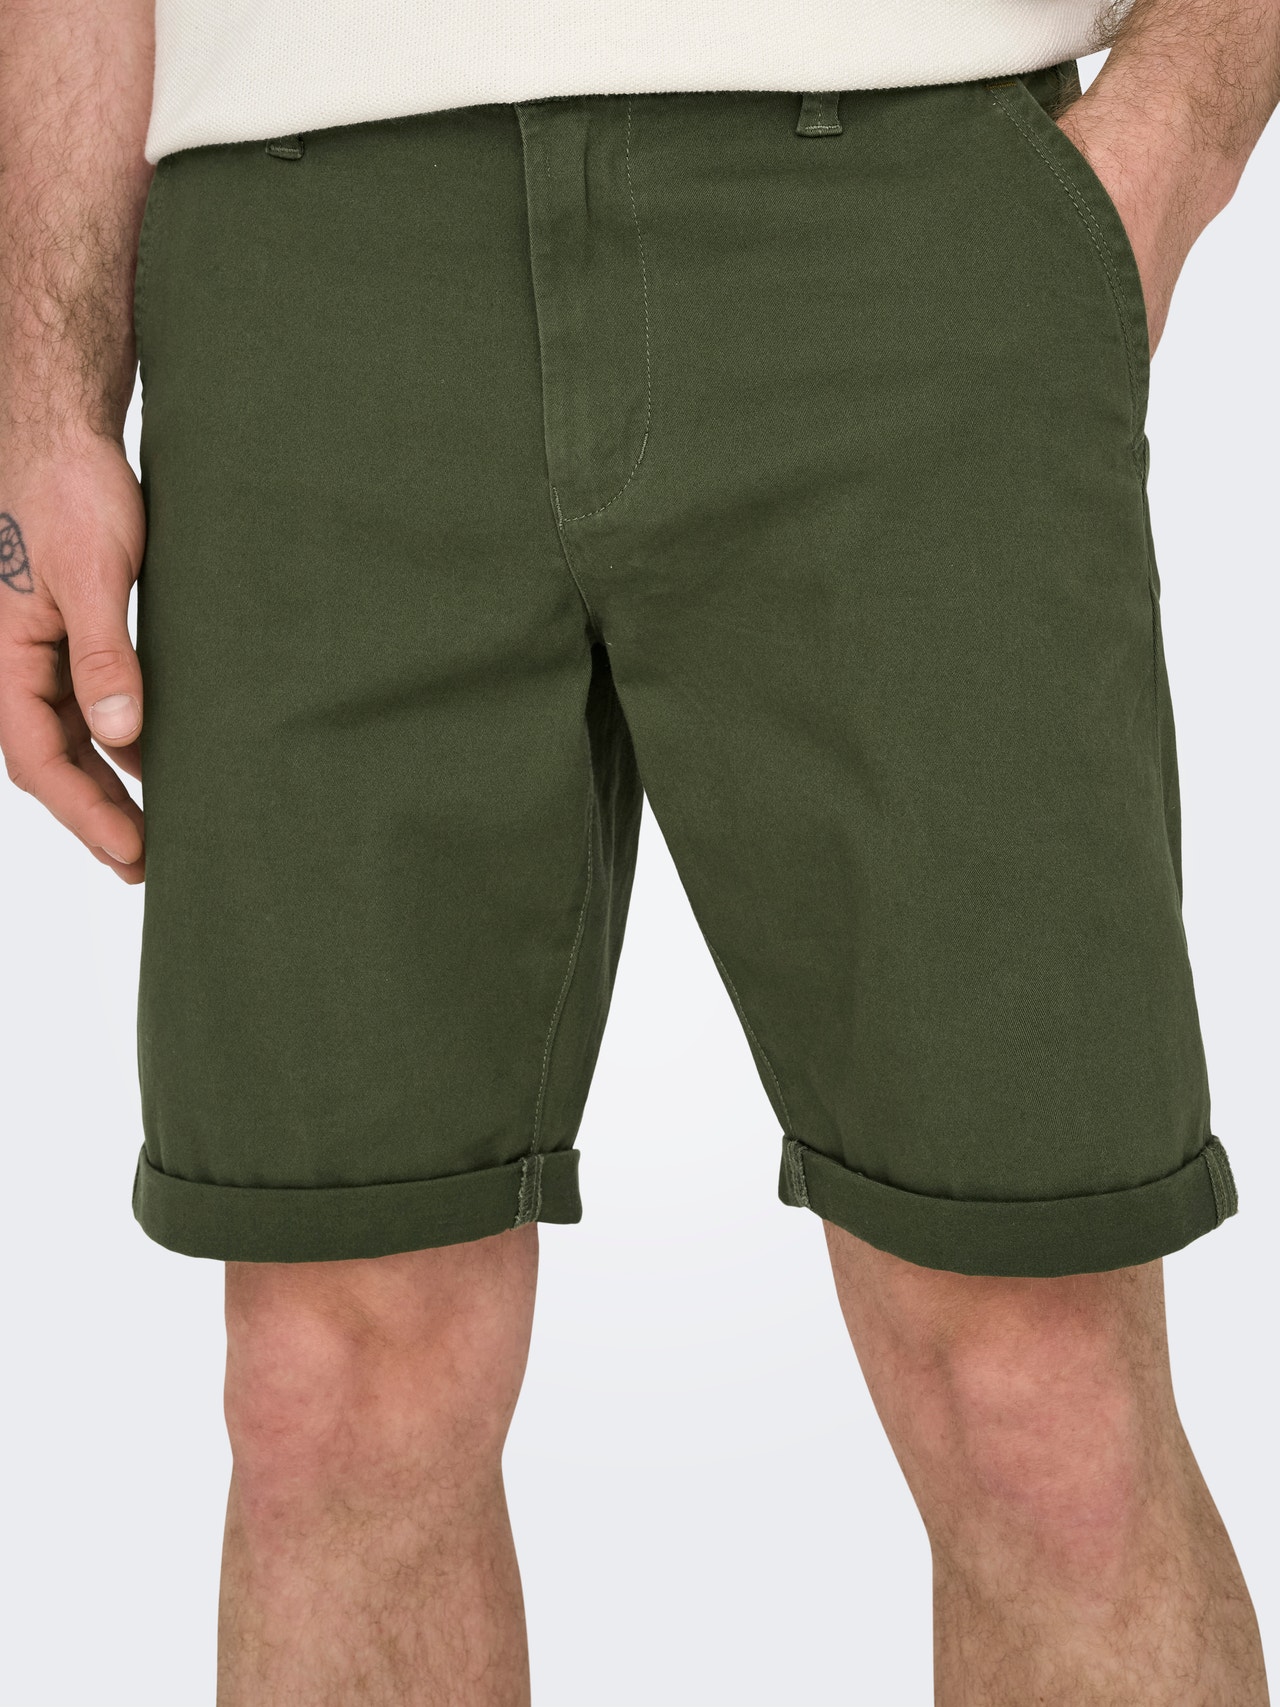 ONLY & SONS Normal passform Shorts -Olive Night - 22027905